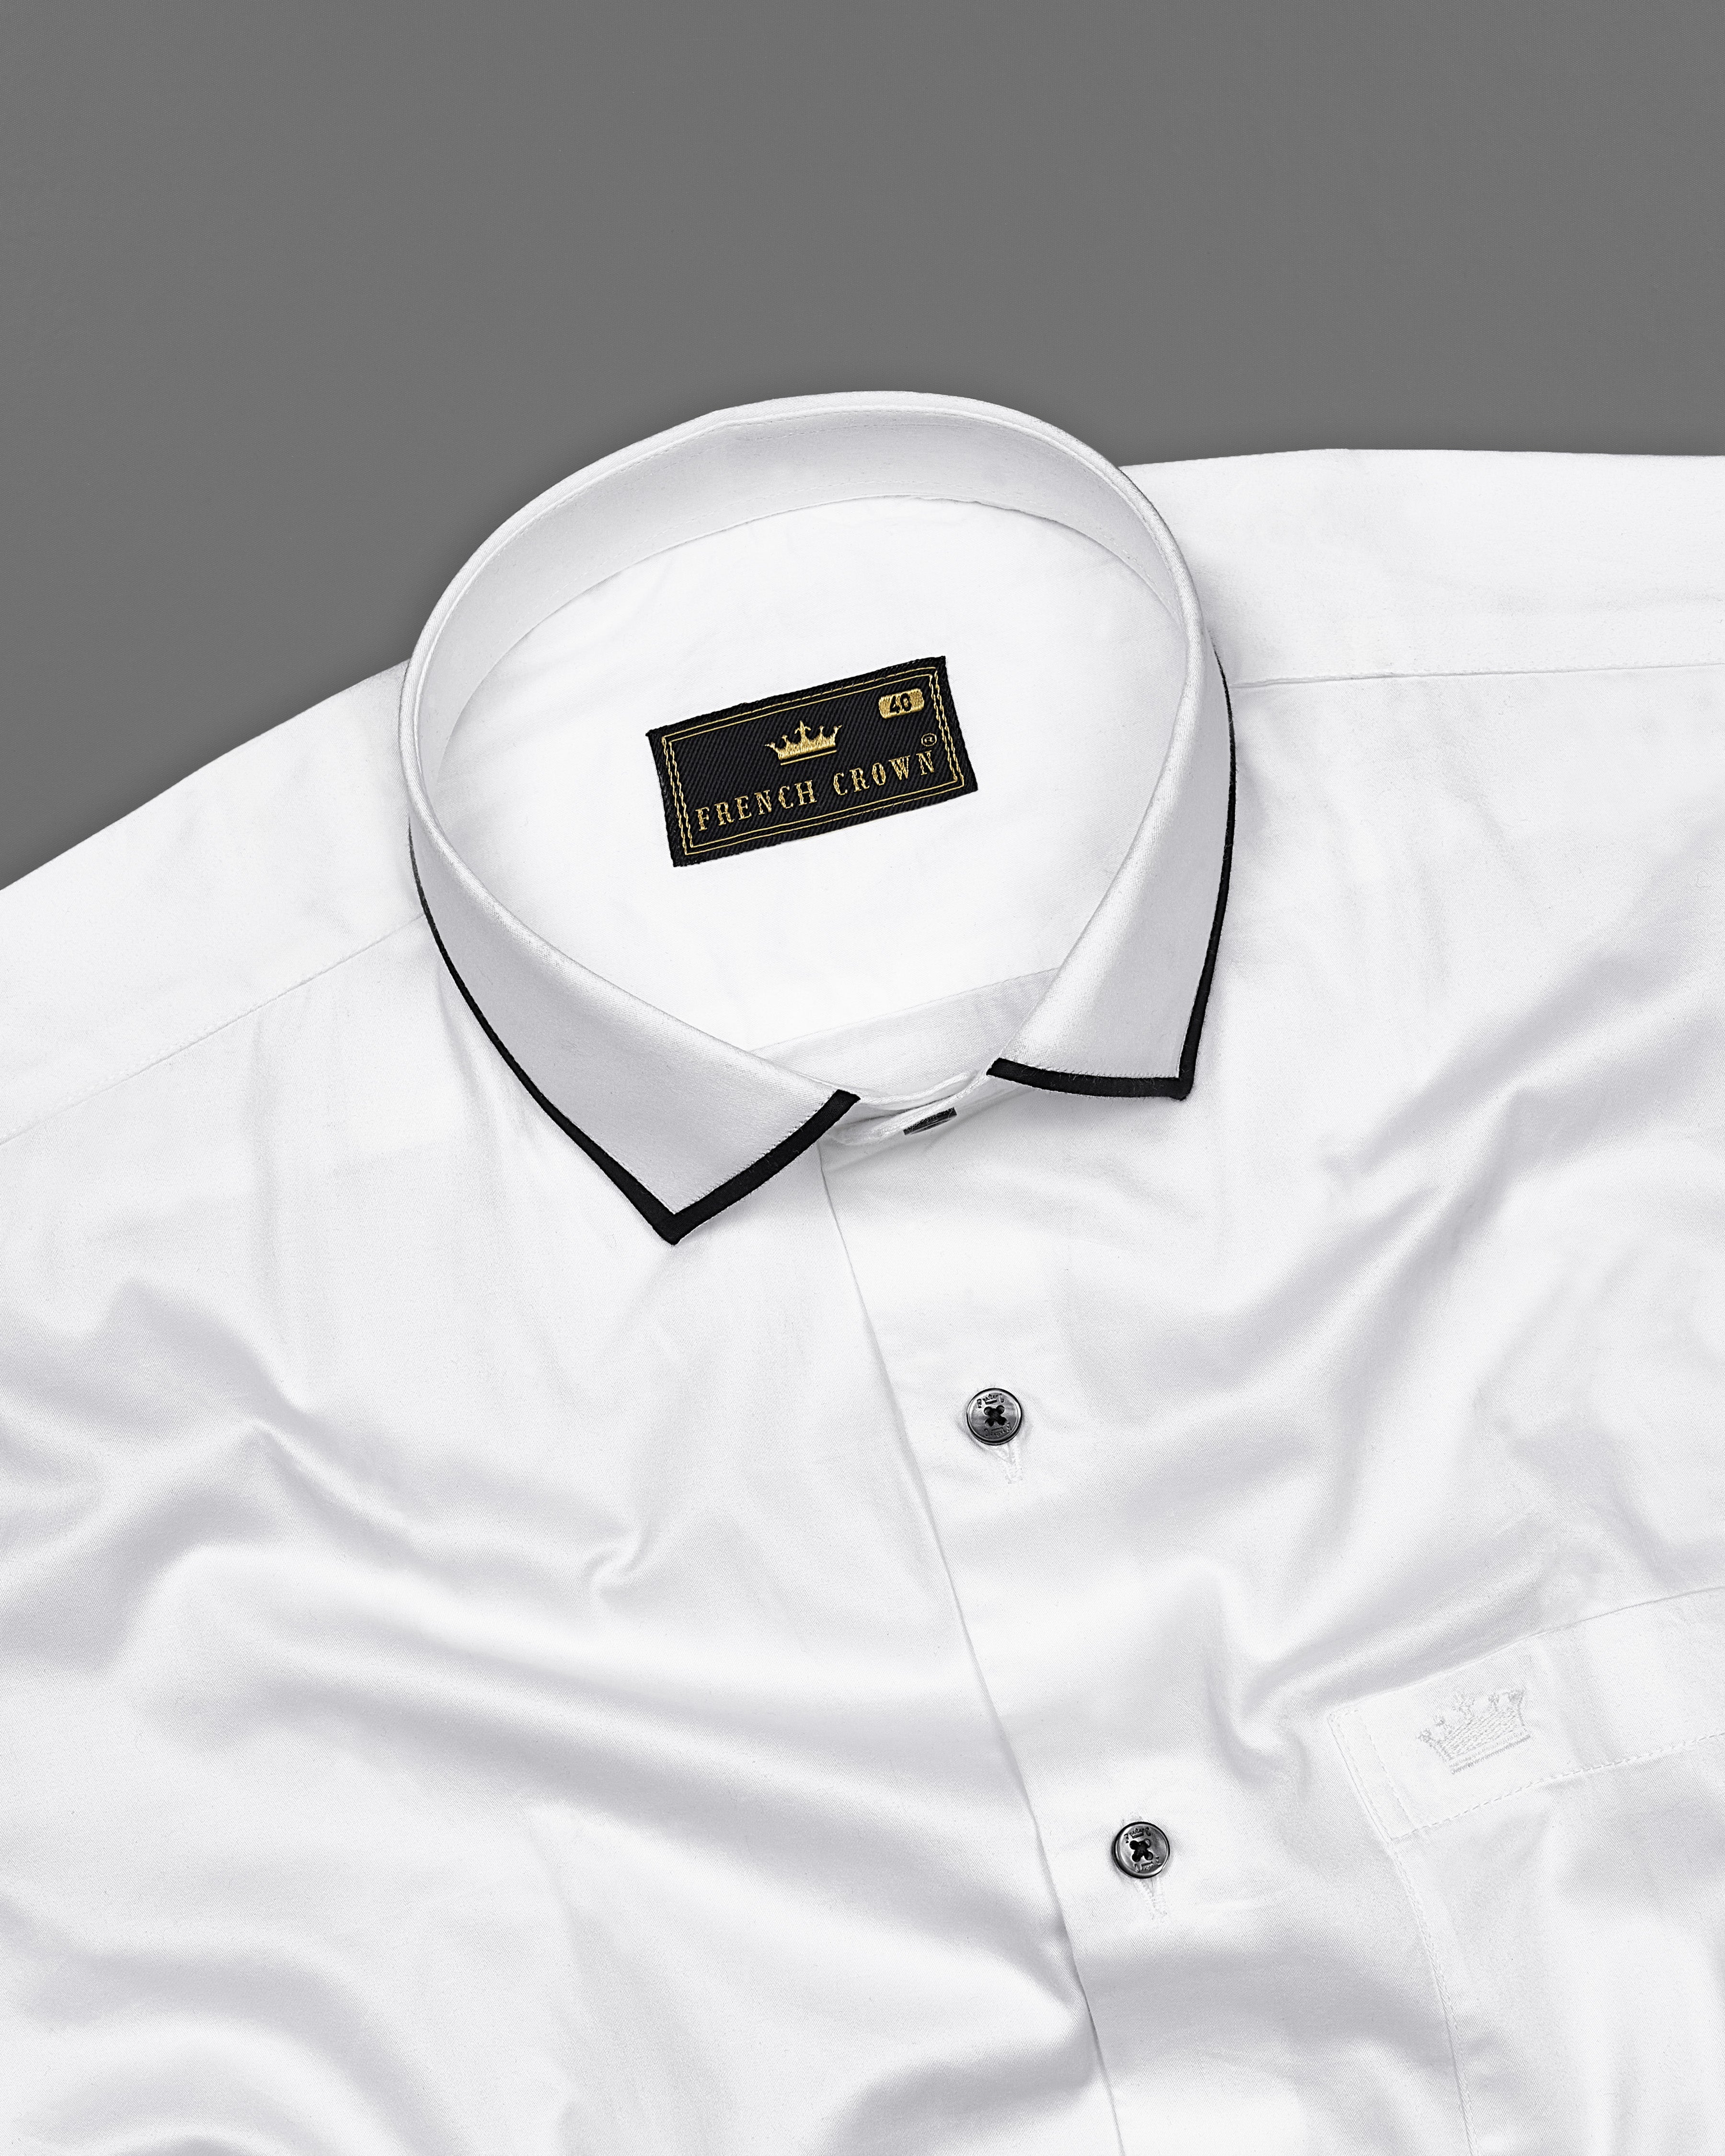 Bright White Subtle Sheen With Collar Detail Giza Cotton Shirt 3075CA-BLK-P14-38, 3075CA-BLK-P14-H-38, 3075CA-BLK-P14-39, 3075CA-BLK-P14-H-39, 3075CA-BLK-P14-40, 3075CA-BLK-P14-H-40, 3075CA-BLK-P14-42, 3075CA-BLK-P14-H-42, 3075CA-BLK-P14-44, 3075CA-BLK-P14-H-44, 3075CA-BLK-P14-46, 3075CA-BLK-P14-H-46, 3075CA-BLK-P14-48, 3075CA-BLK-P14-H-48, 3075CA-BLK-P14-50, 3075CA-BLK-P14-H-50, 3075CA-BLK-P14-52, 3075CA-BLK-P14-H-52